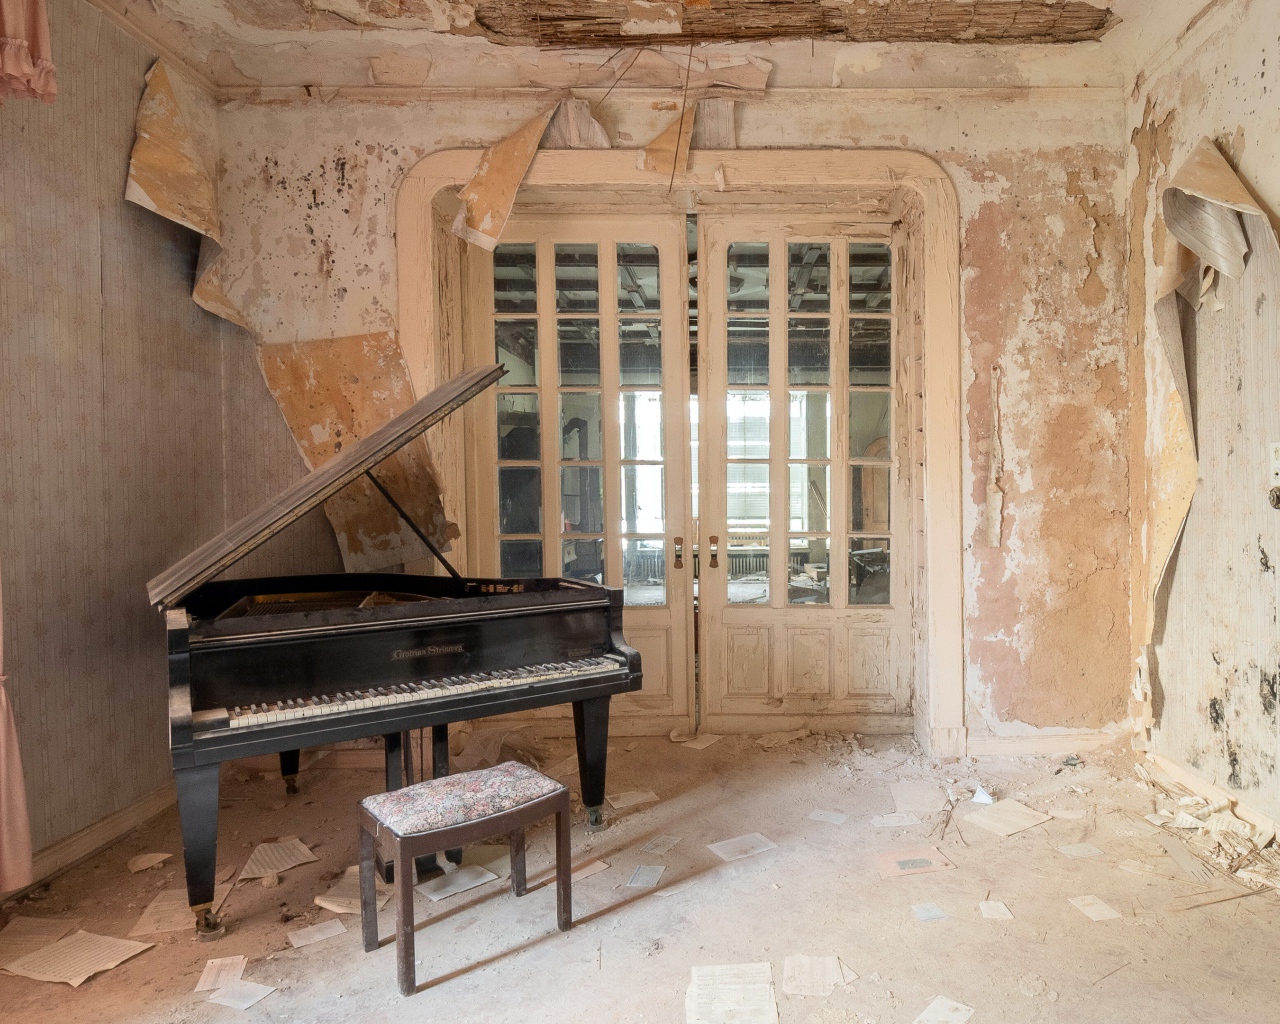 Old abandoned apartment with a grand piano